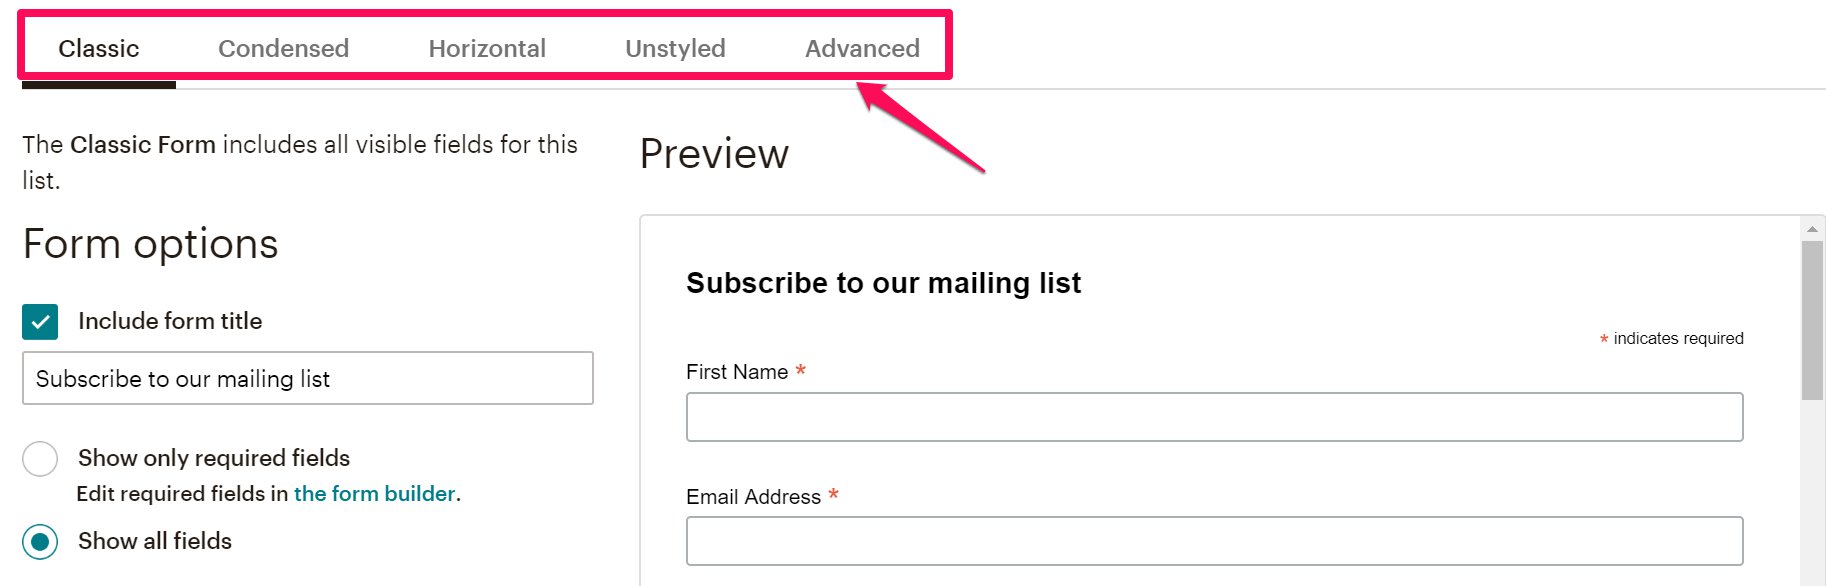 Choose the style of signup form in Mailchimp forms to embed into website